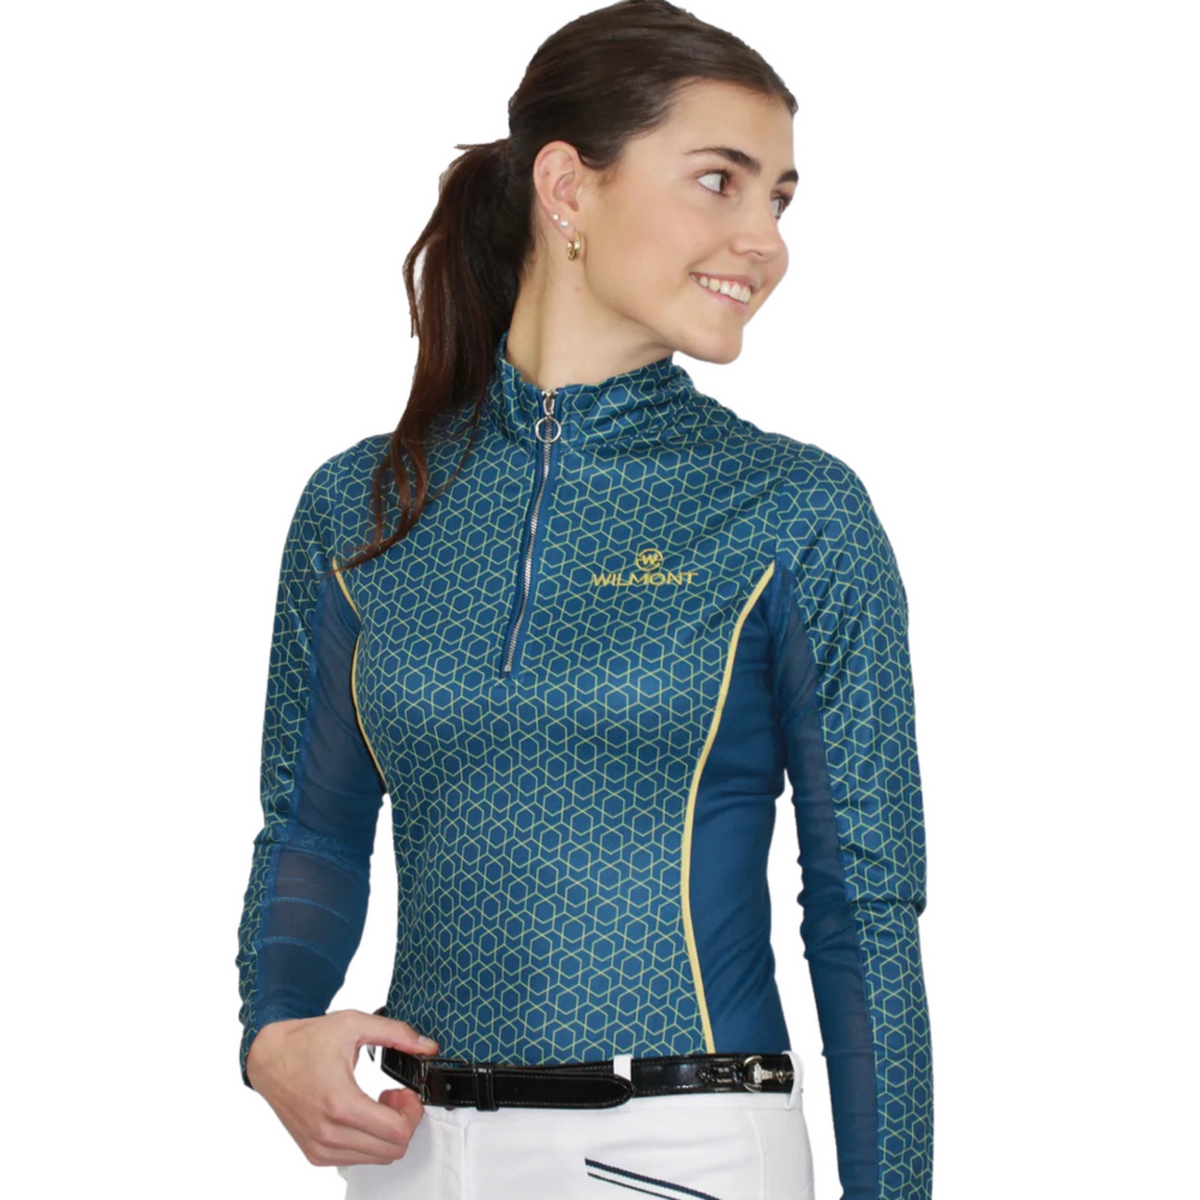 Blue half zip long sleeve with geometric patterns and gold logo.